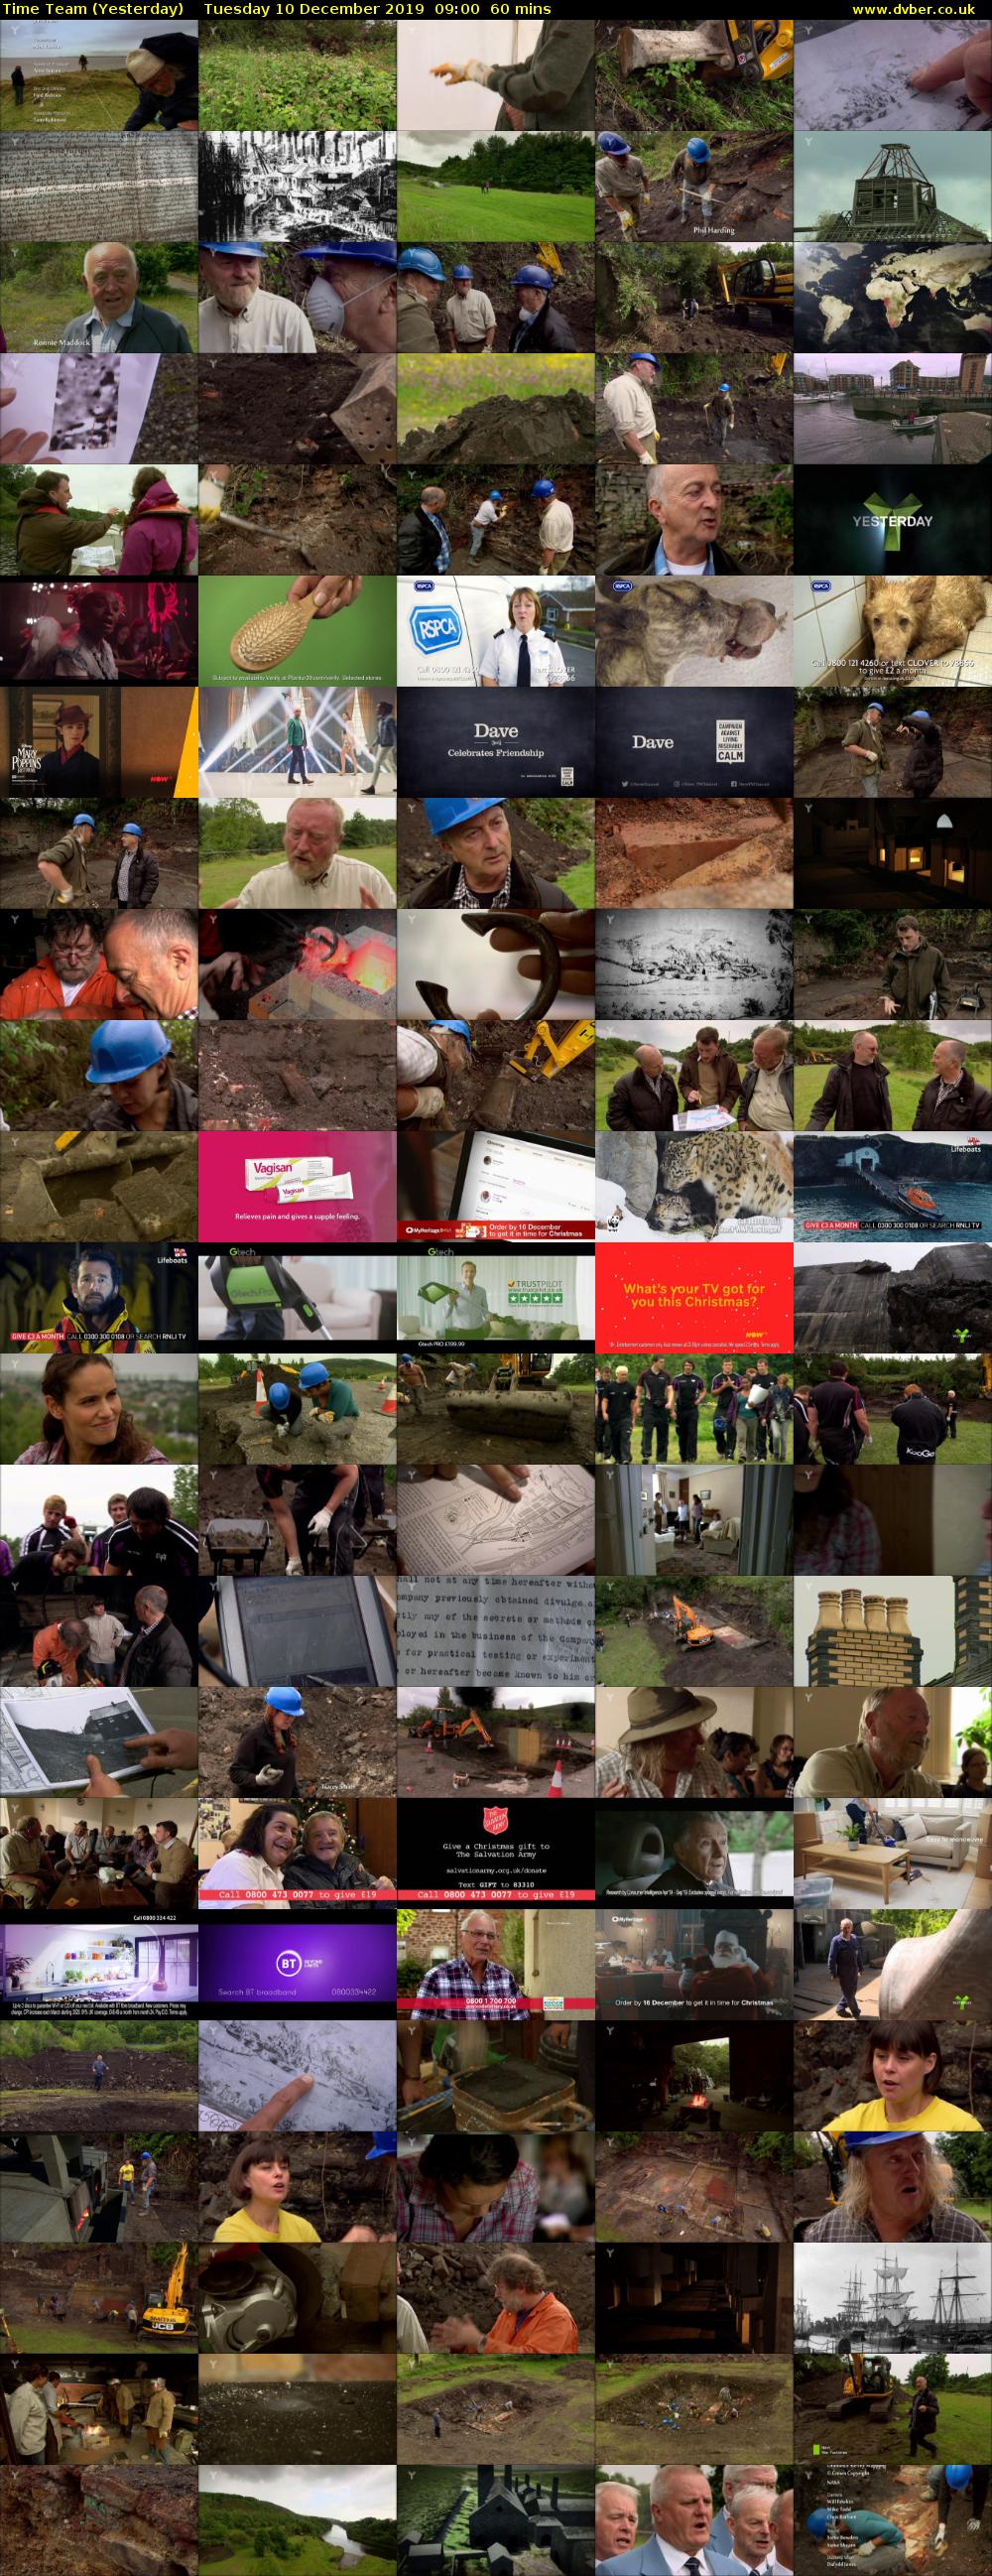 Time Team (Yesterday) Tuesday 10 December 2019 09:00 - 10:00